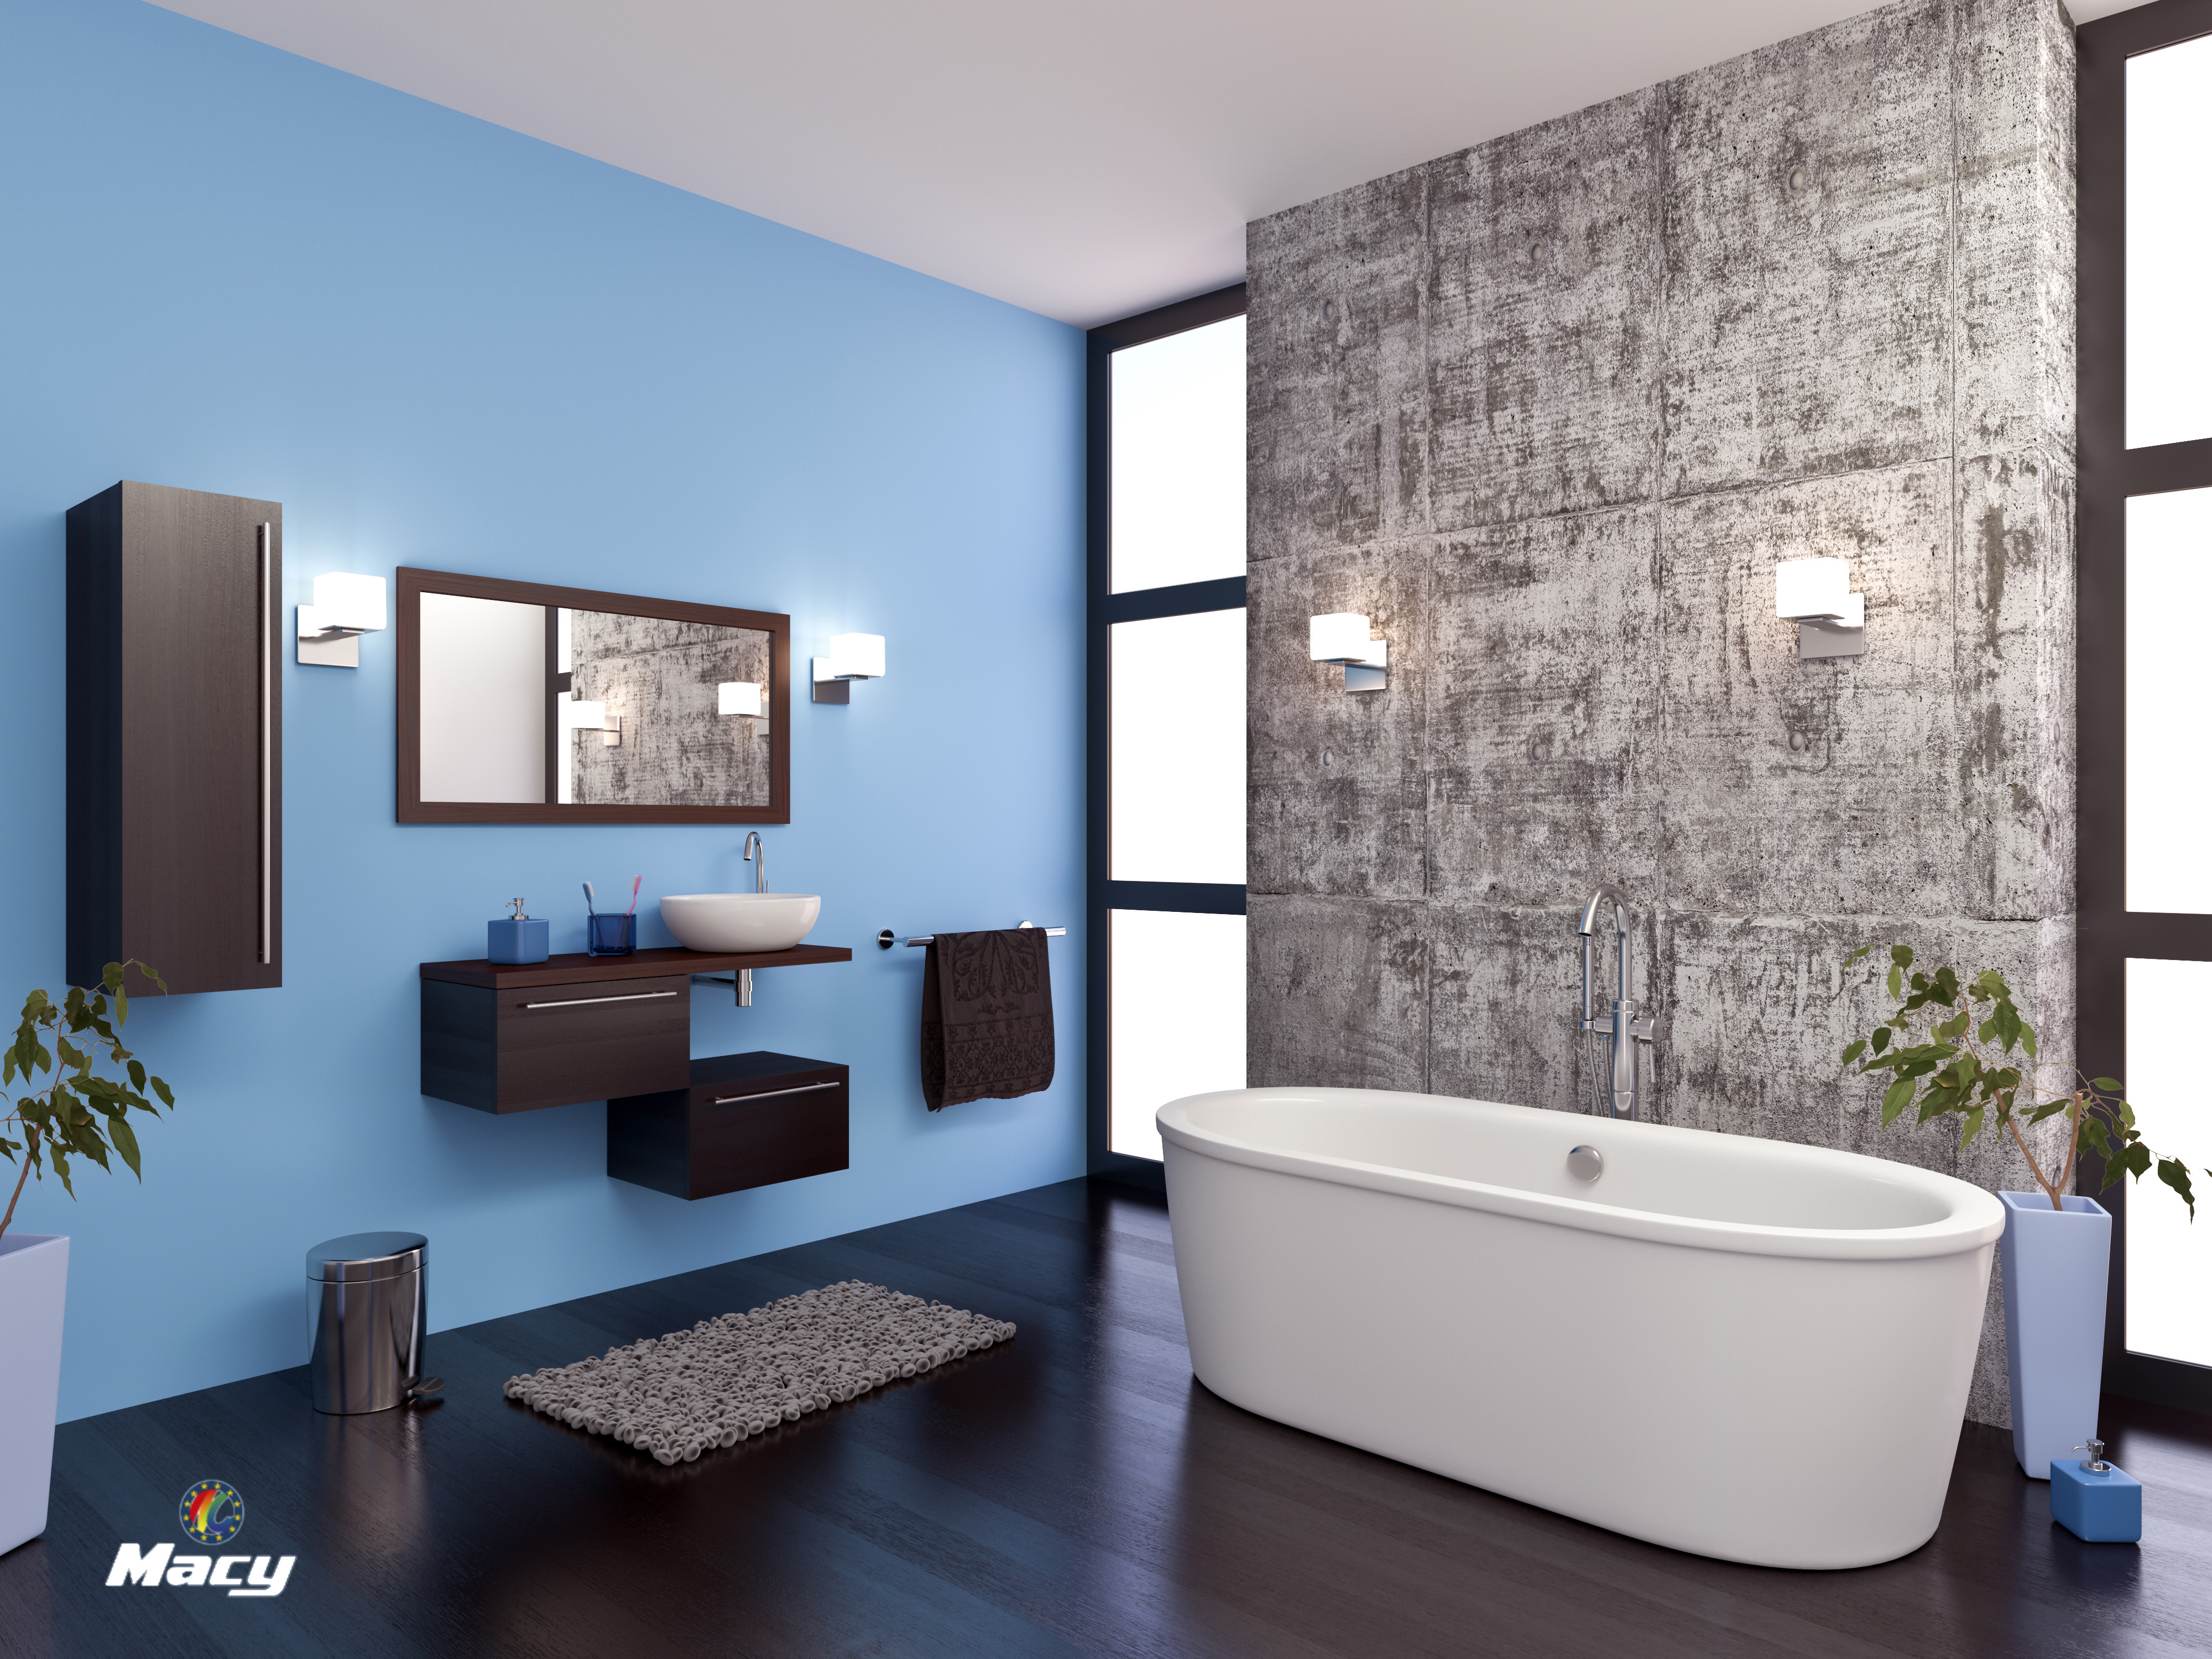 HOW TO PAINT YOUR BATHROOM EASILY